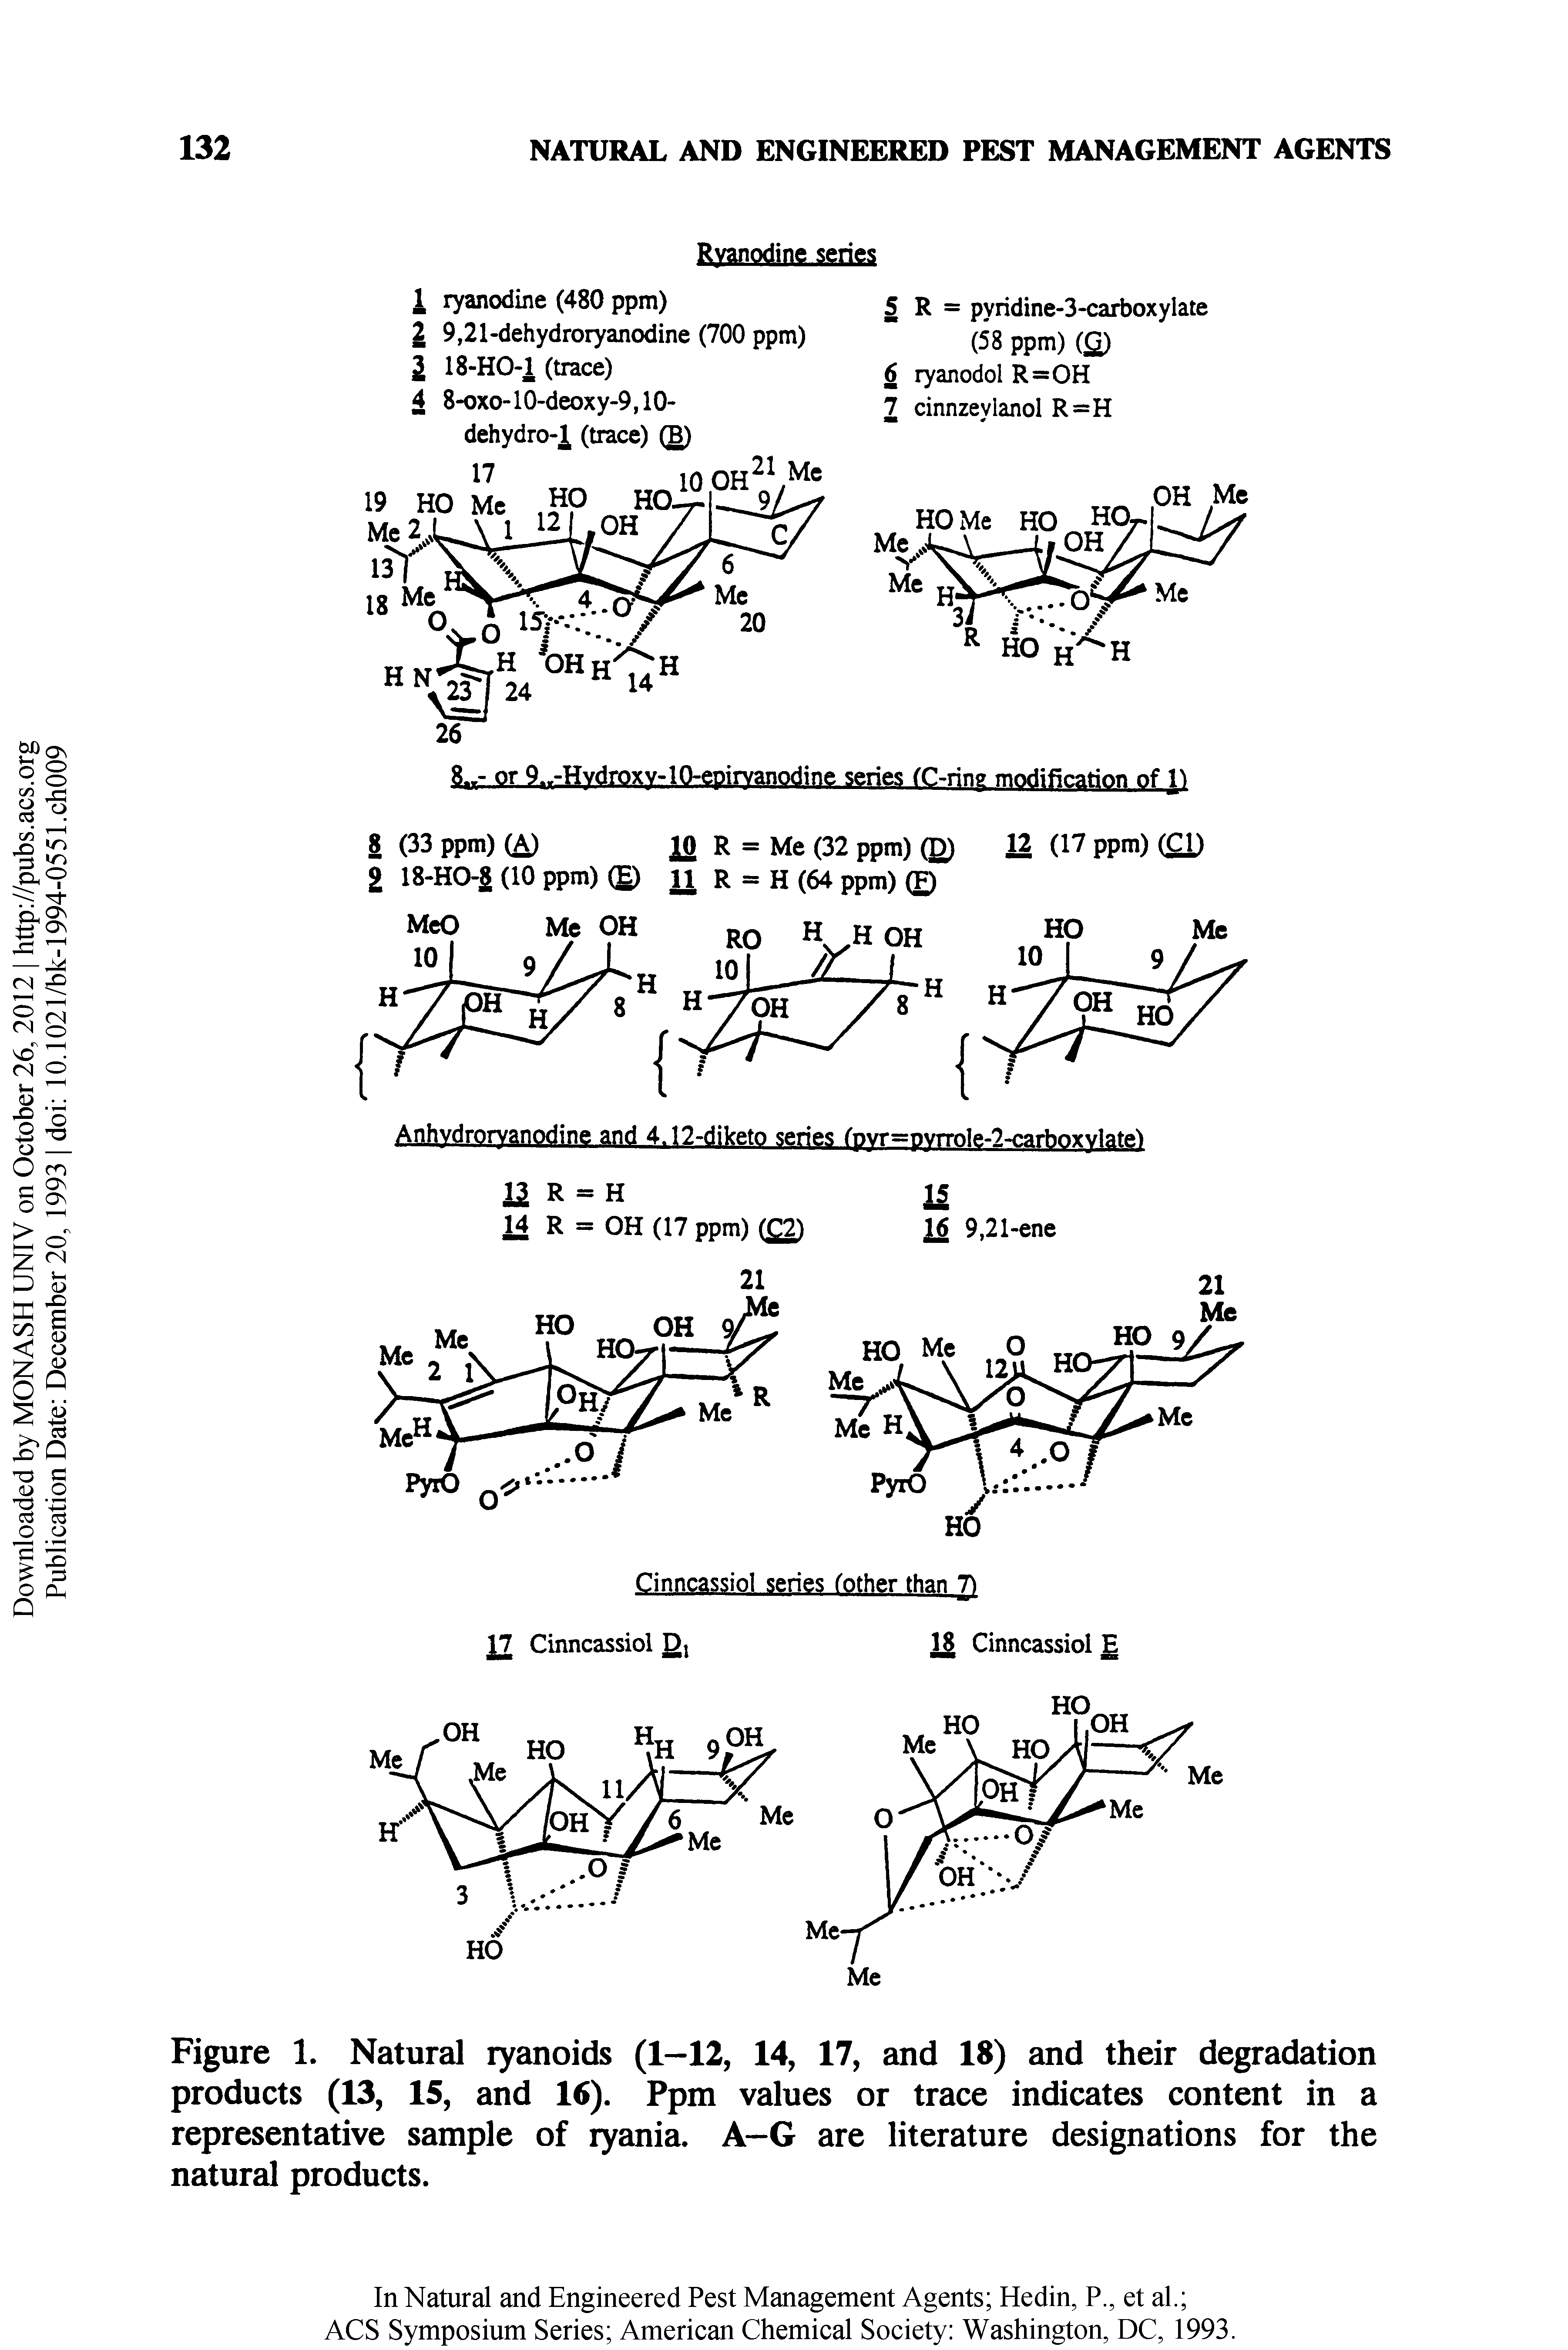 Figure 1. Natural ryanoids (1-12, 14, 17, and 18) and their degradation products (13, 15, and 16). Ppm values or trace indicates content in a representative sample of ryania. A-G are literature designations for the natural products.